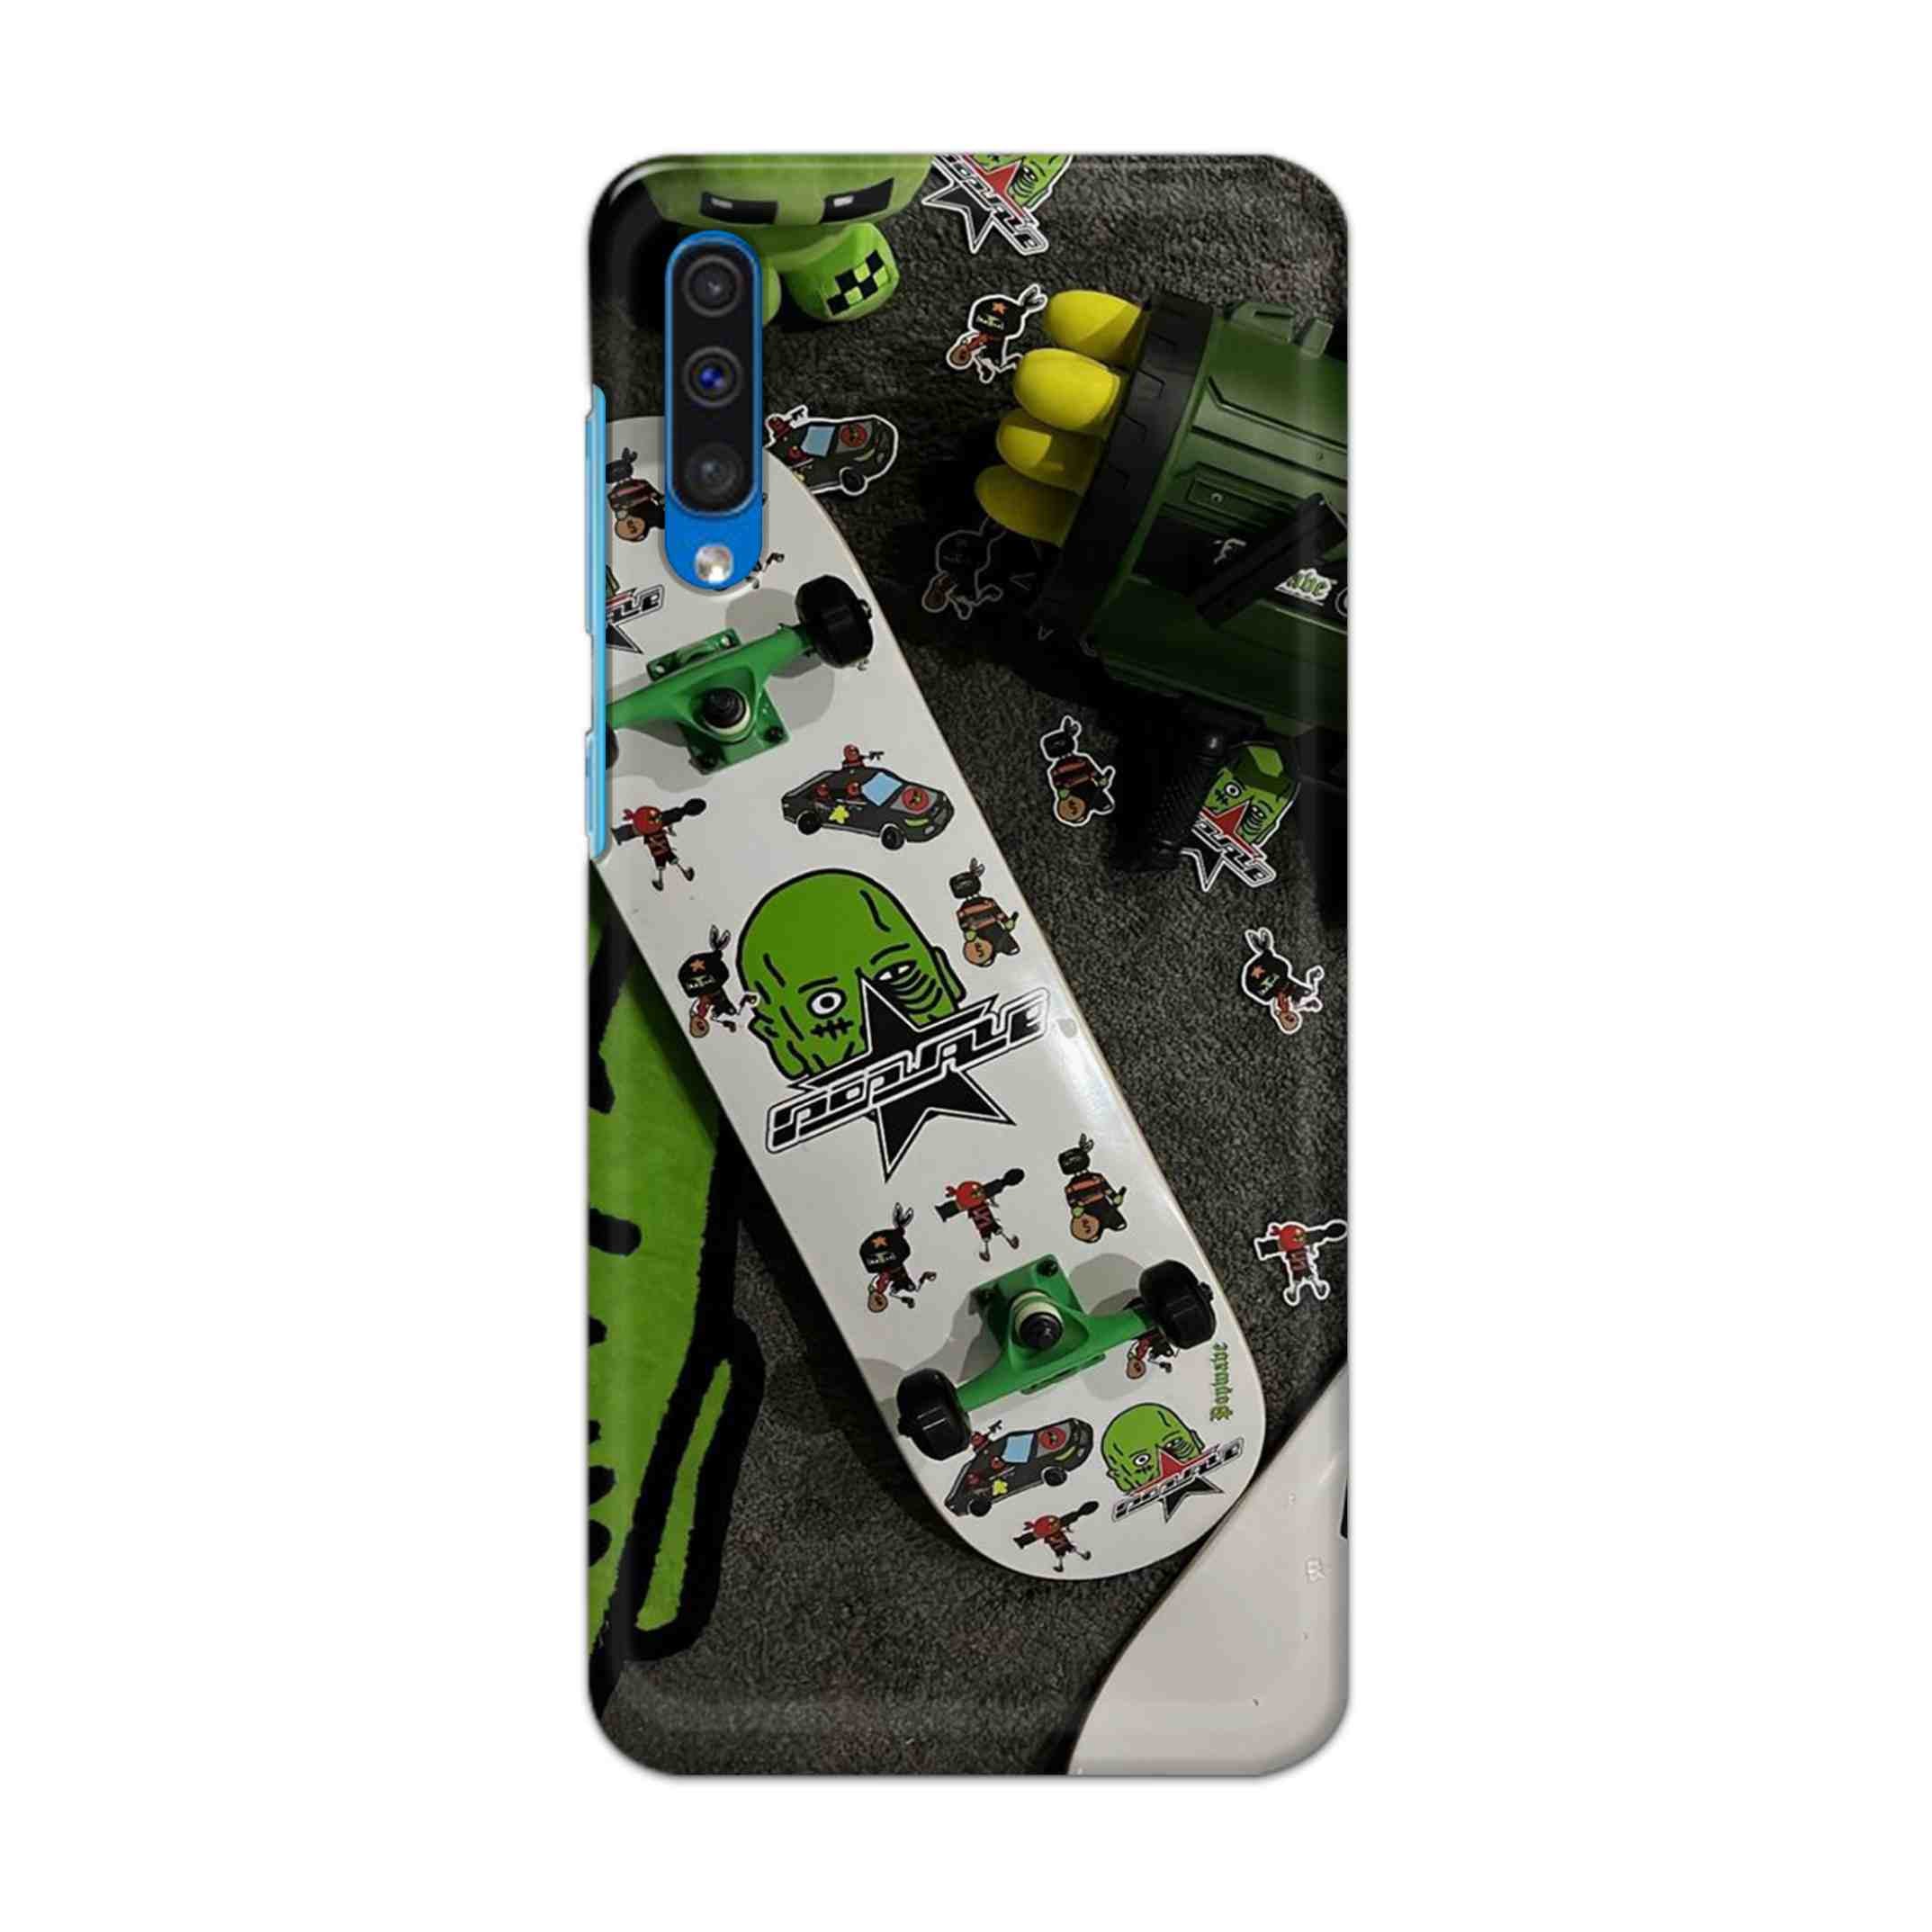 Buy Hulk Skateboard Hard Back Mobile Phone Case Cover For Samsung Galaxy A50 / A50s / A30s Online